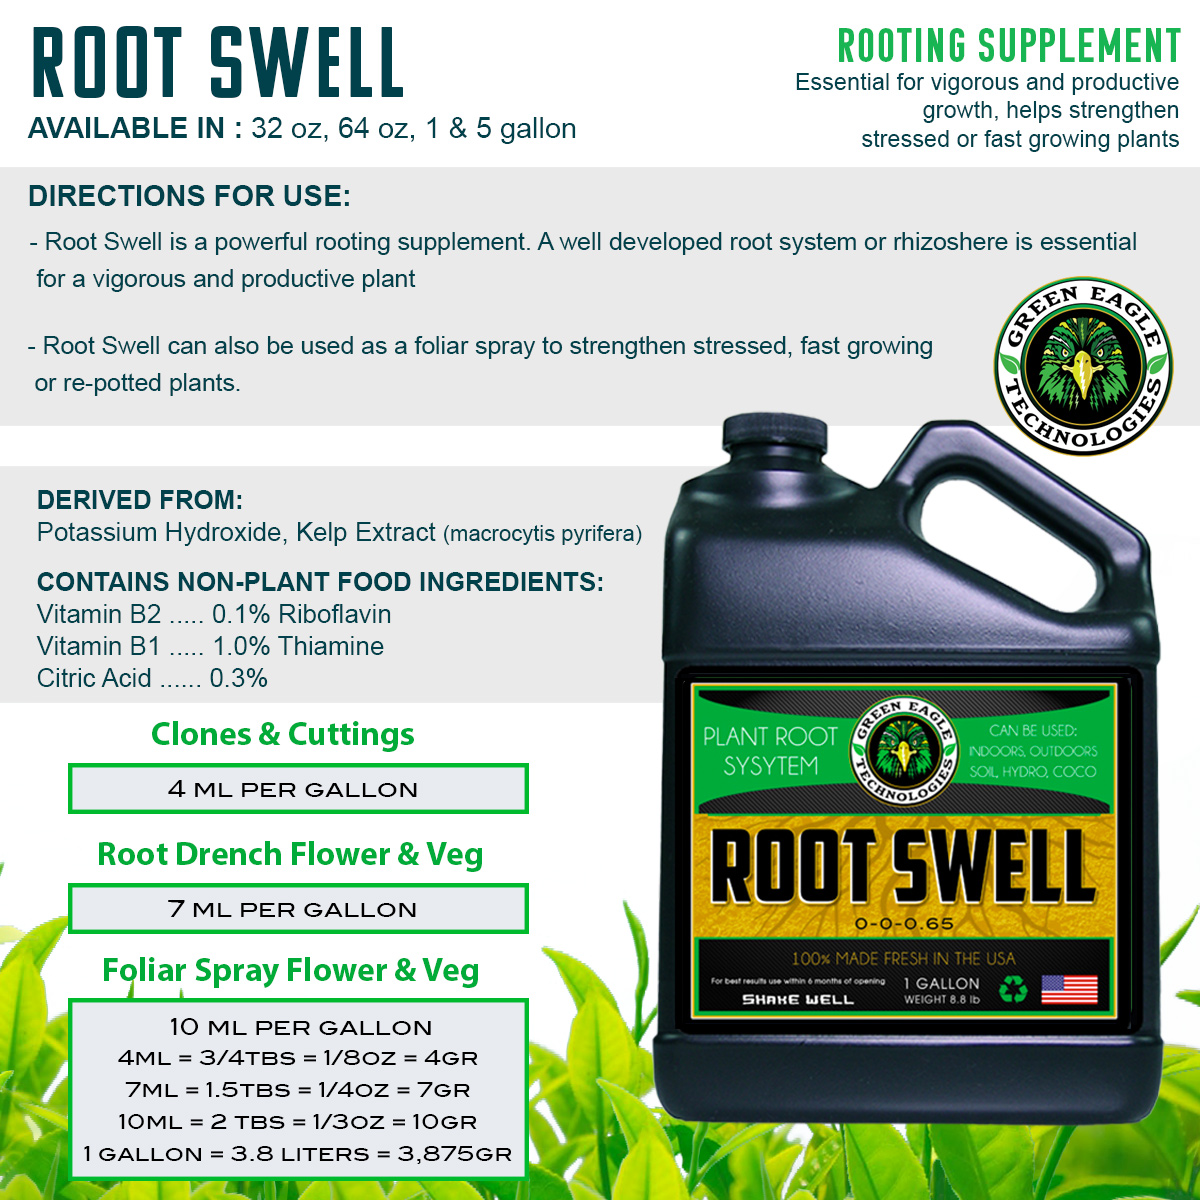 Root Swell Applications by Green Eagle Technologies